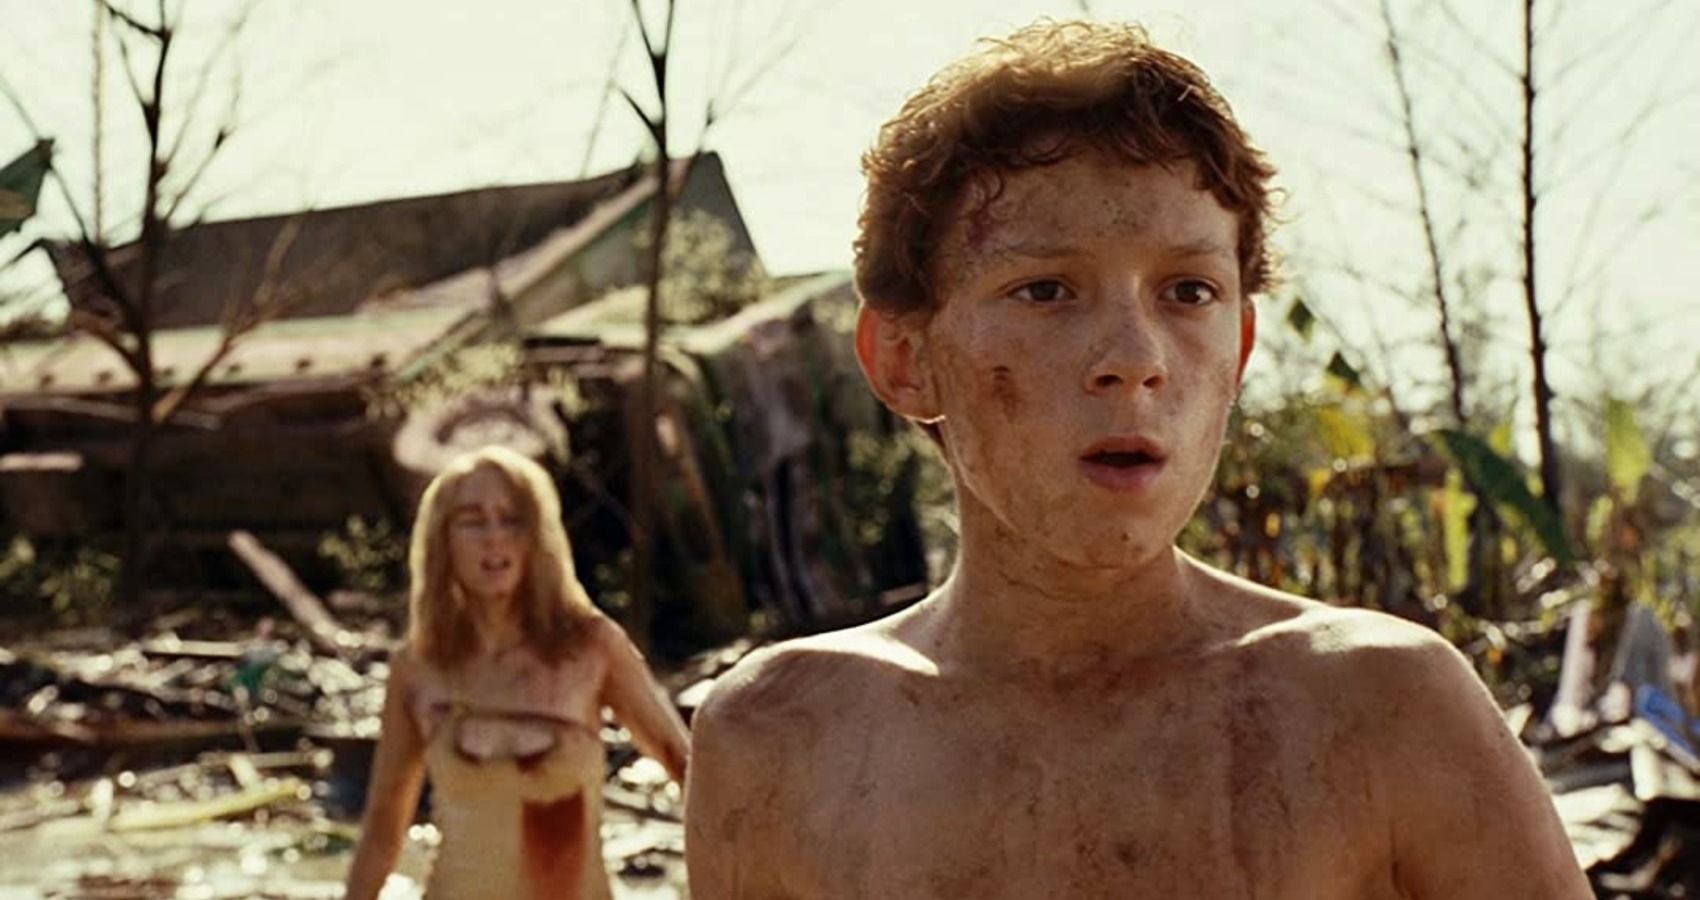 the impossible tom holland and naomi watts in the aftermath of the tsunami